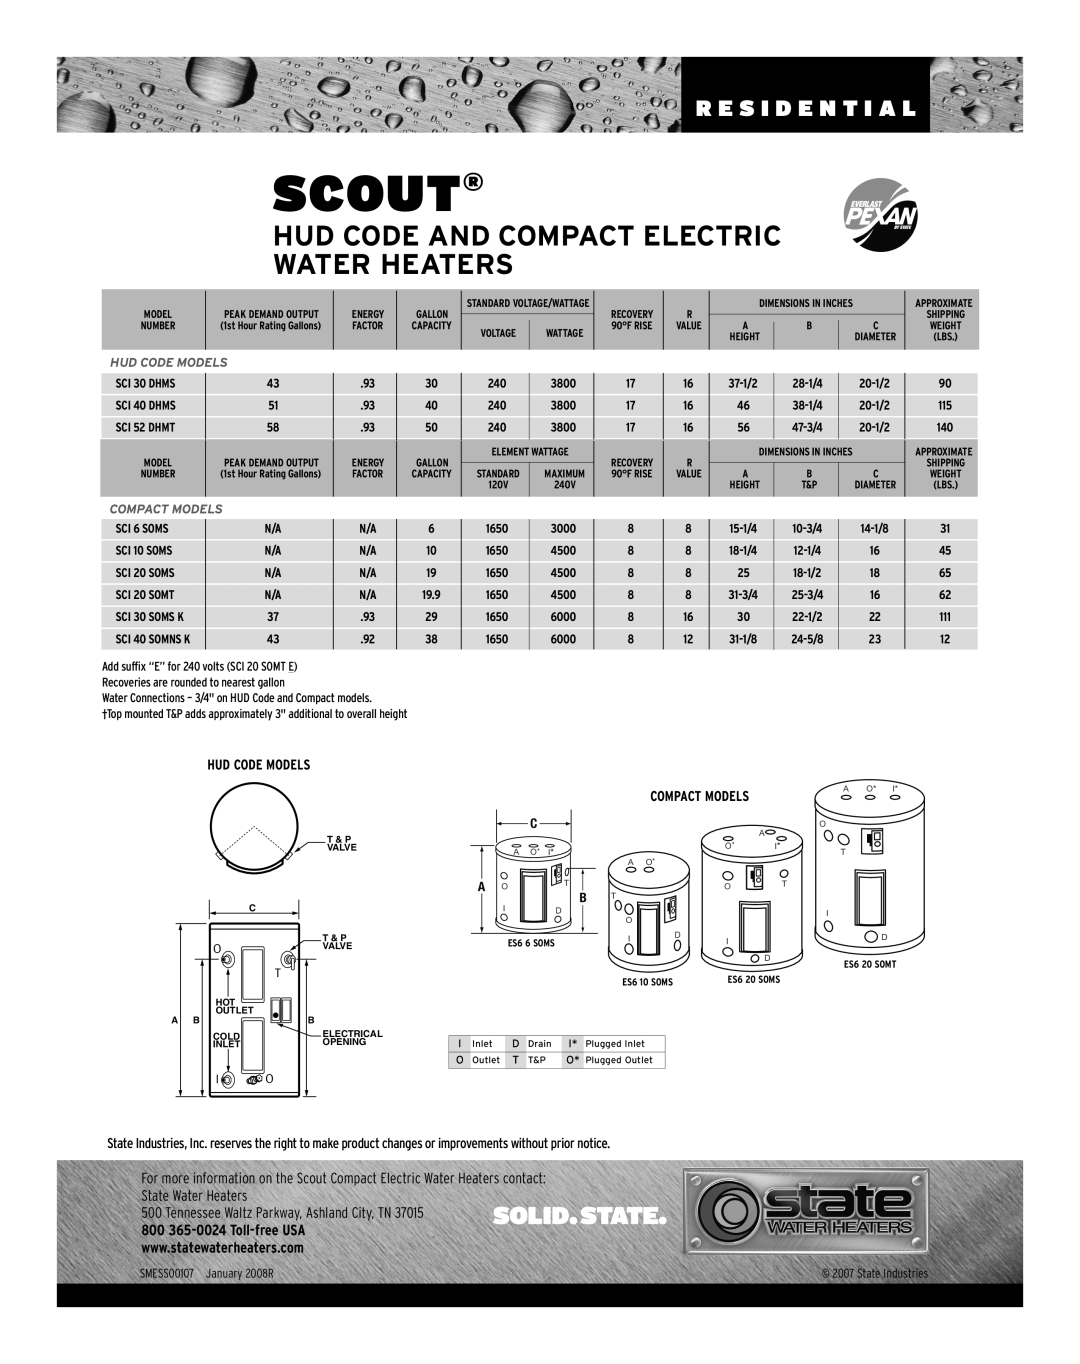 State Industries SMESS00107 Scout, Hud Code And Compact Electric Water Heaters, R E S I D E N T I A L, Hud Code Models 